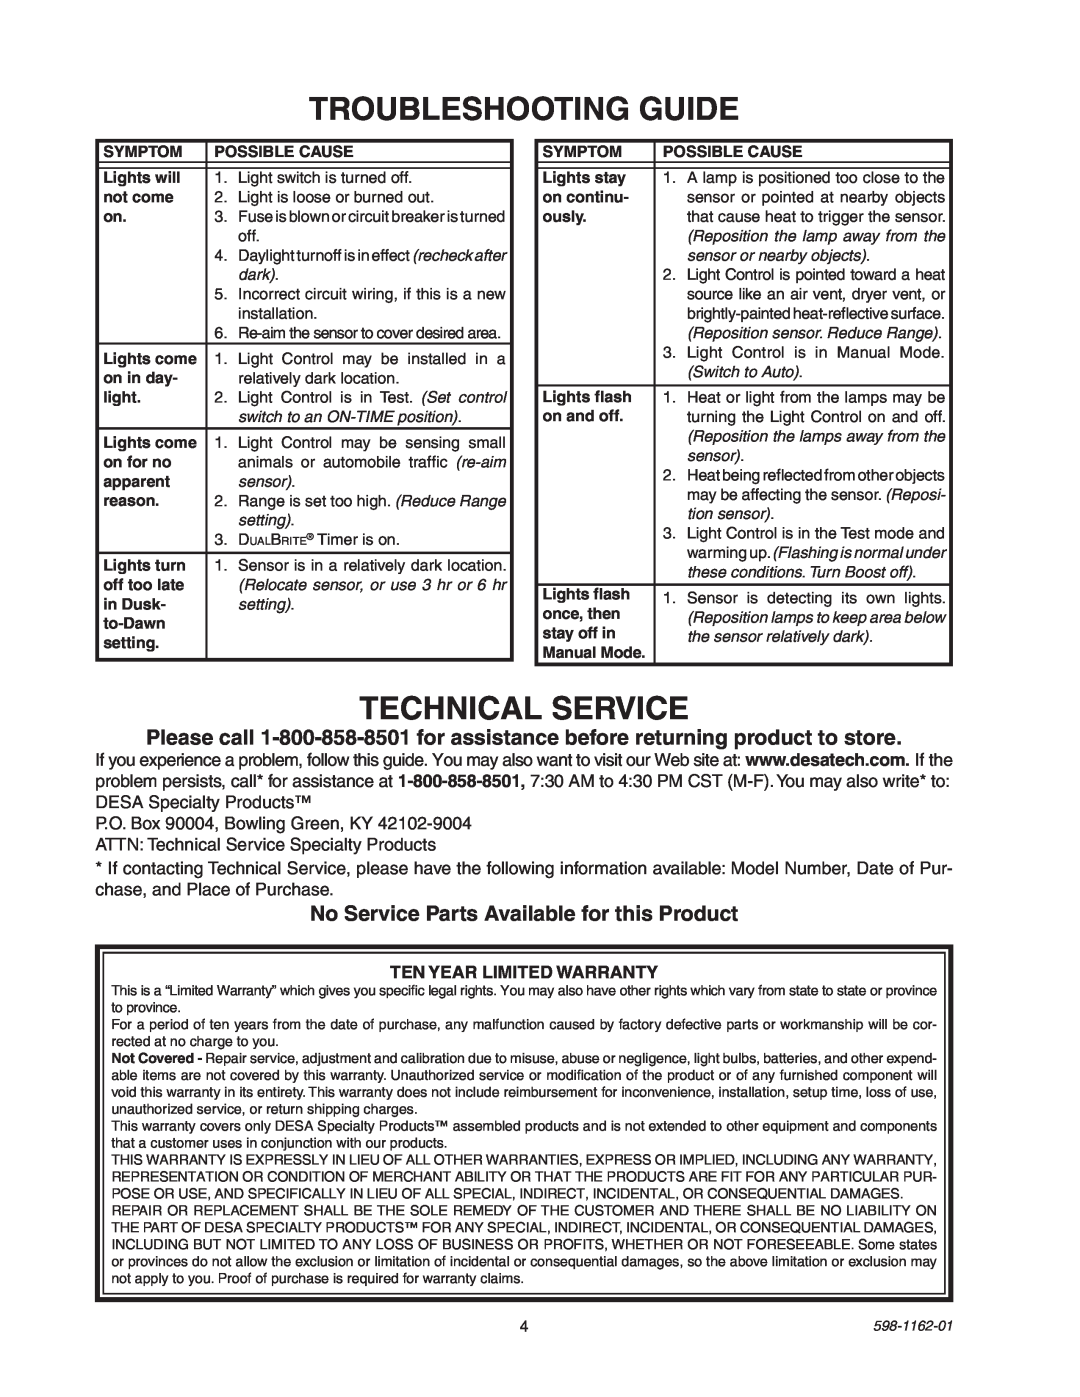 Desa SH-5597 manual Troubleshooting Guide, Technical Service, No Service Parts Available for this Product 